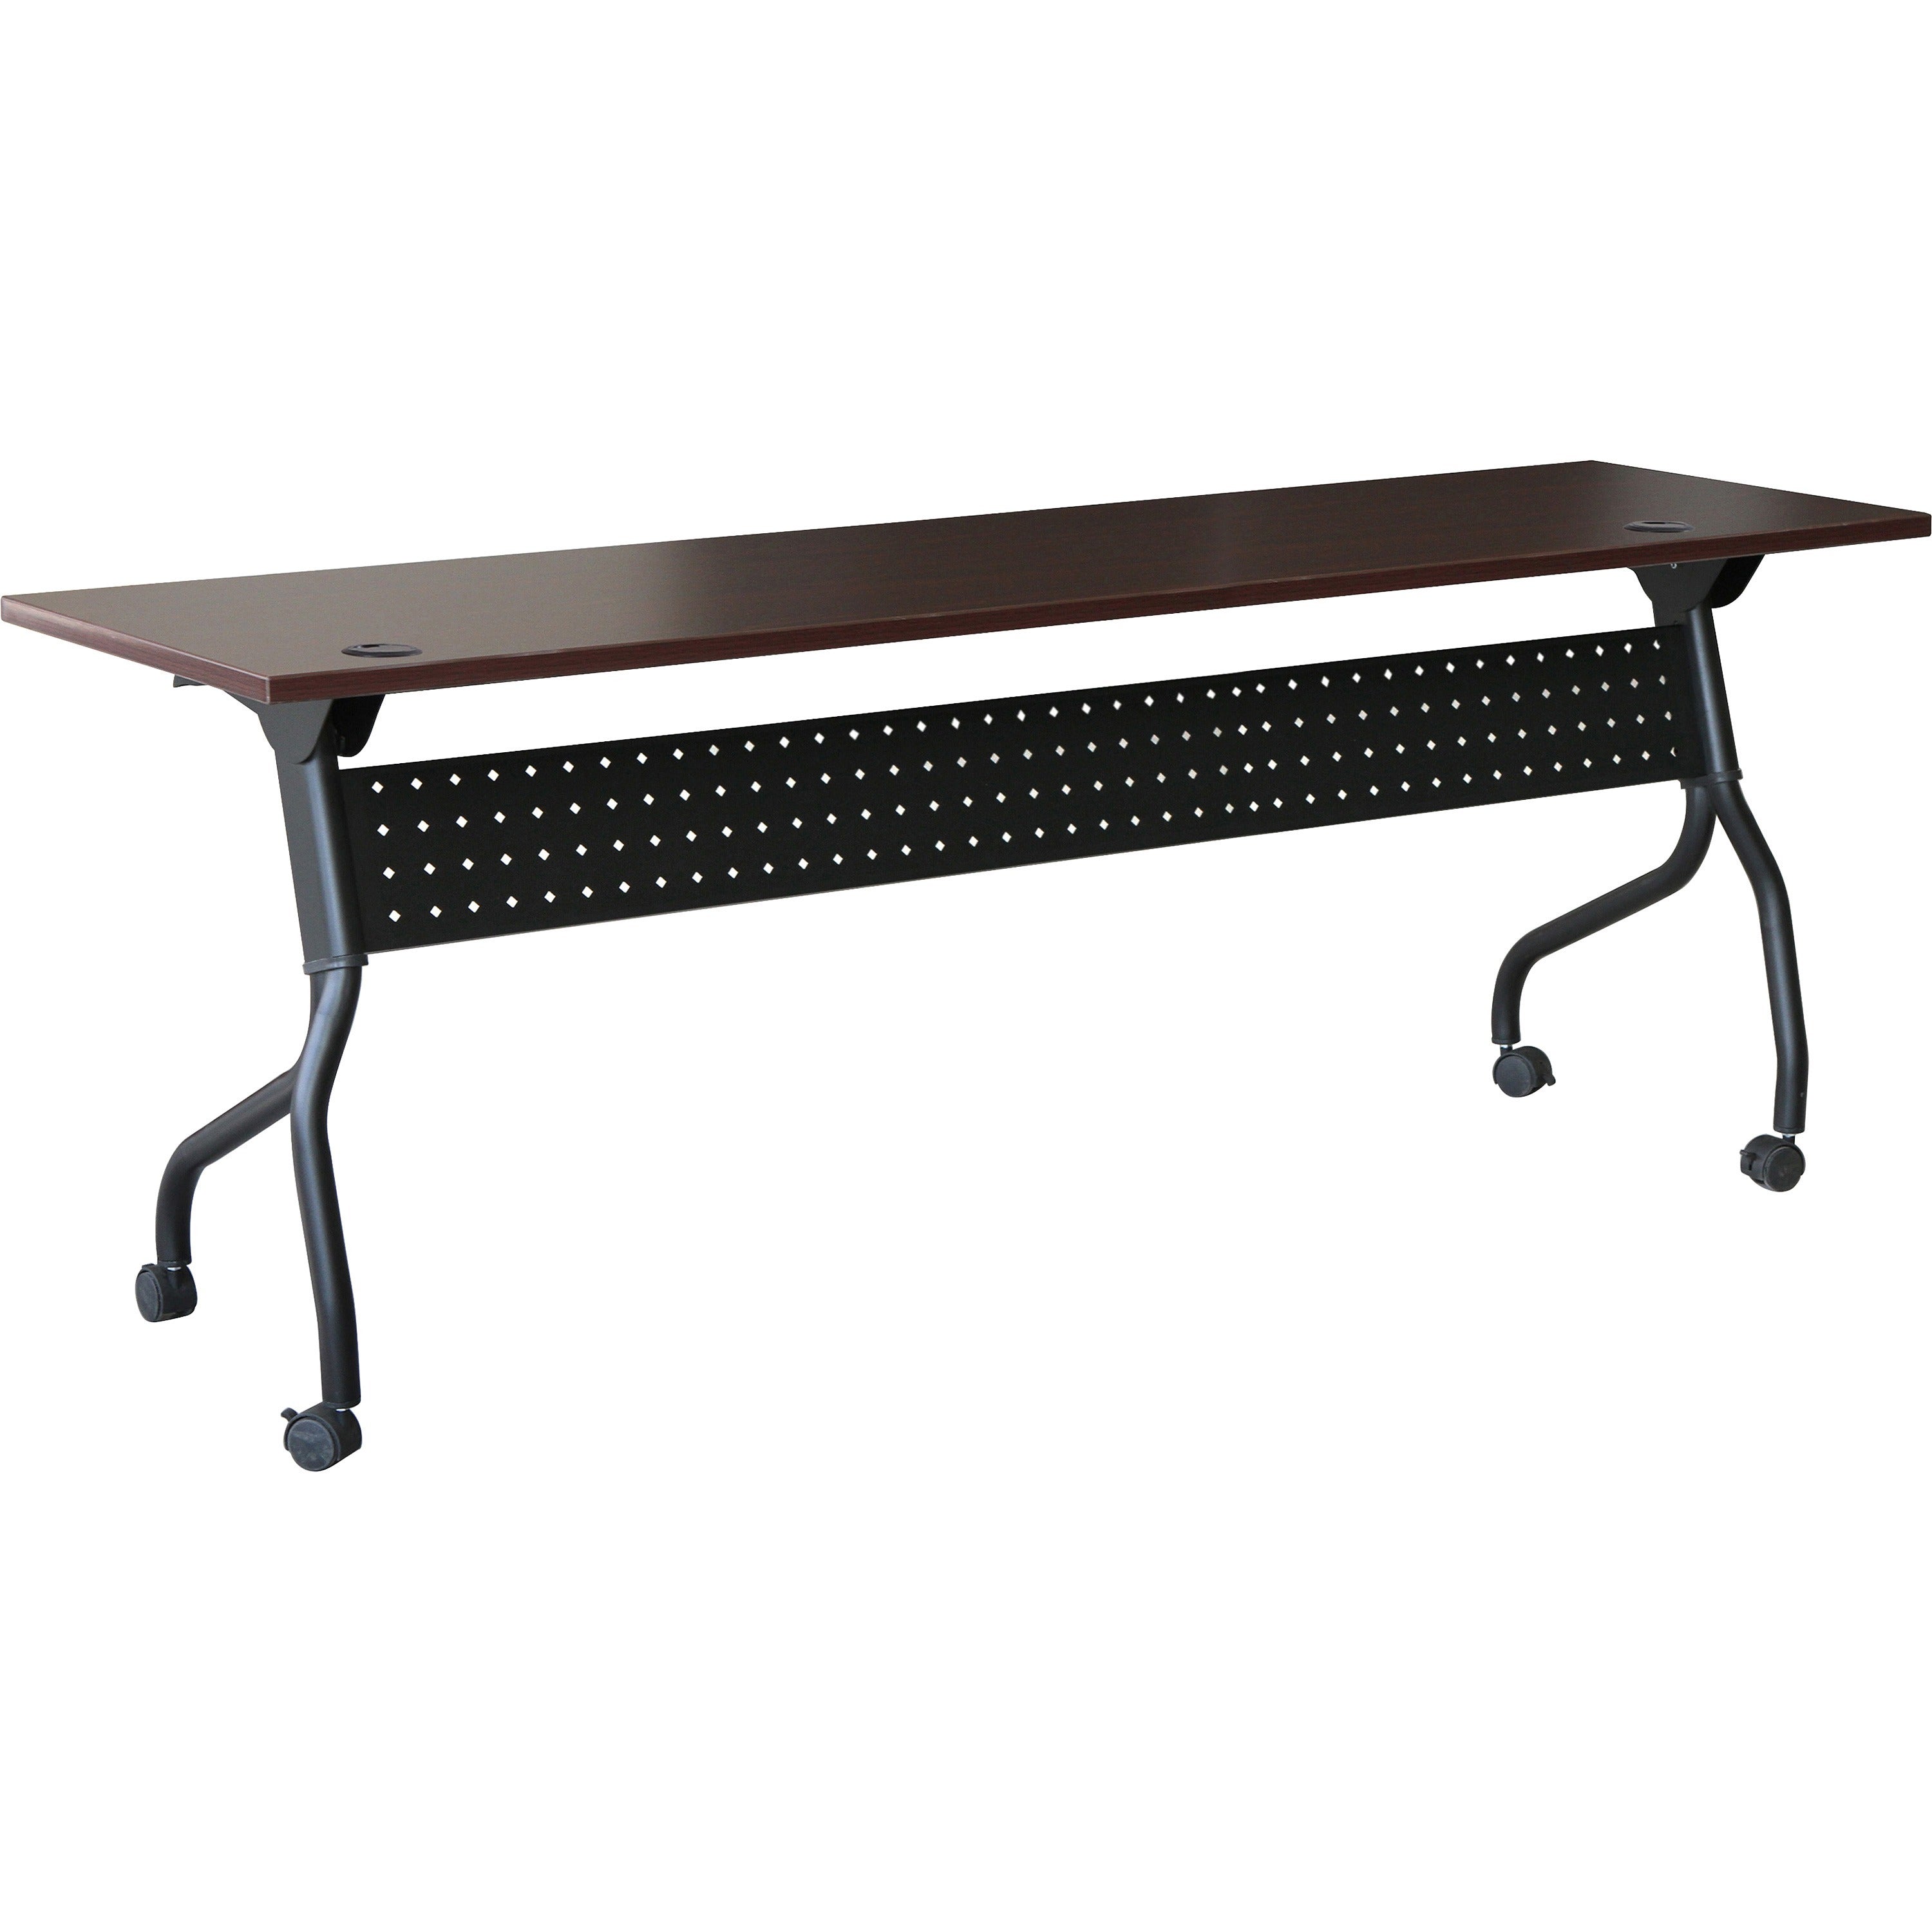 Lorell Flip Top Training Table - For - Table TopRectangle Top - Four Leg Base - 4 Legs x 72" Table Top Width x 23.60" Table Top Depth - 29.50" Height x 70.88" Width x 23.63" Depth - Assembly Required - Black, Mahogany - Melamine, Nylon - 1 Each - 